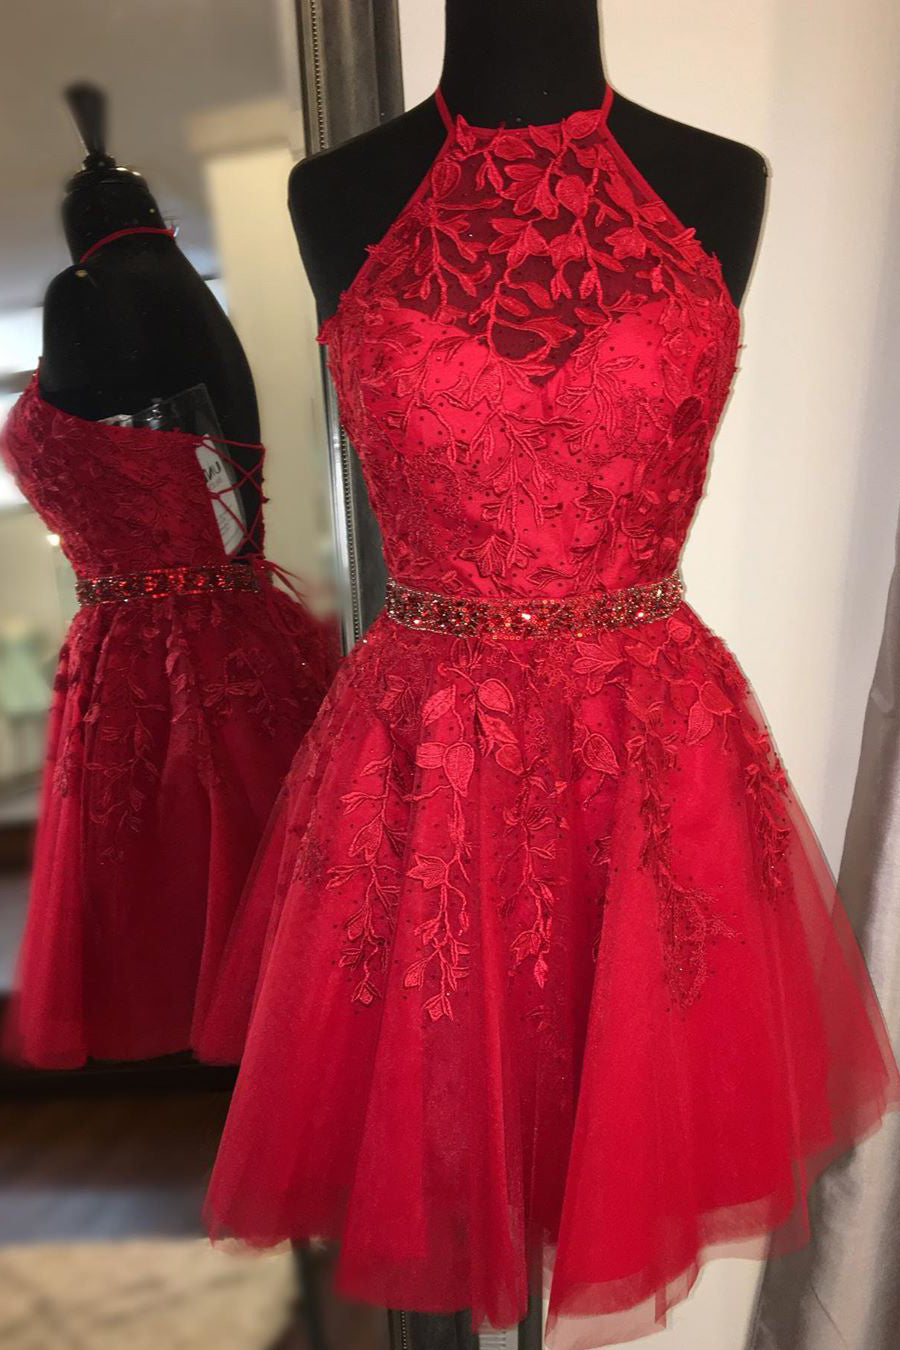 Burgundy Lace Homecoming Dress Halter Neckline, Short Prom Dress ,Winter Formal Dress, Pageant Dance Dresses, Back To School Party Gown, PC0676